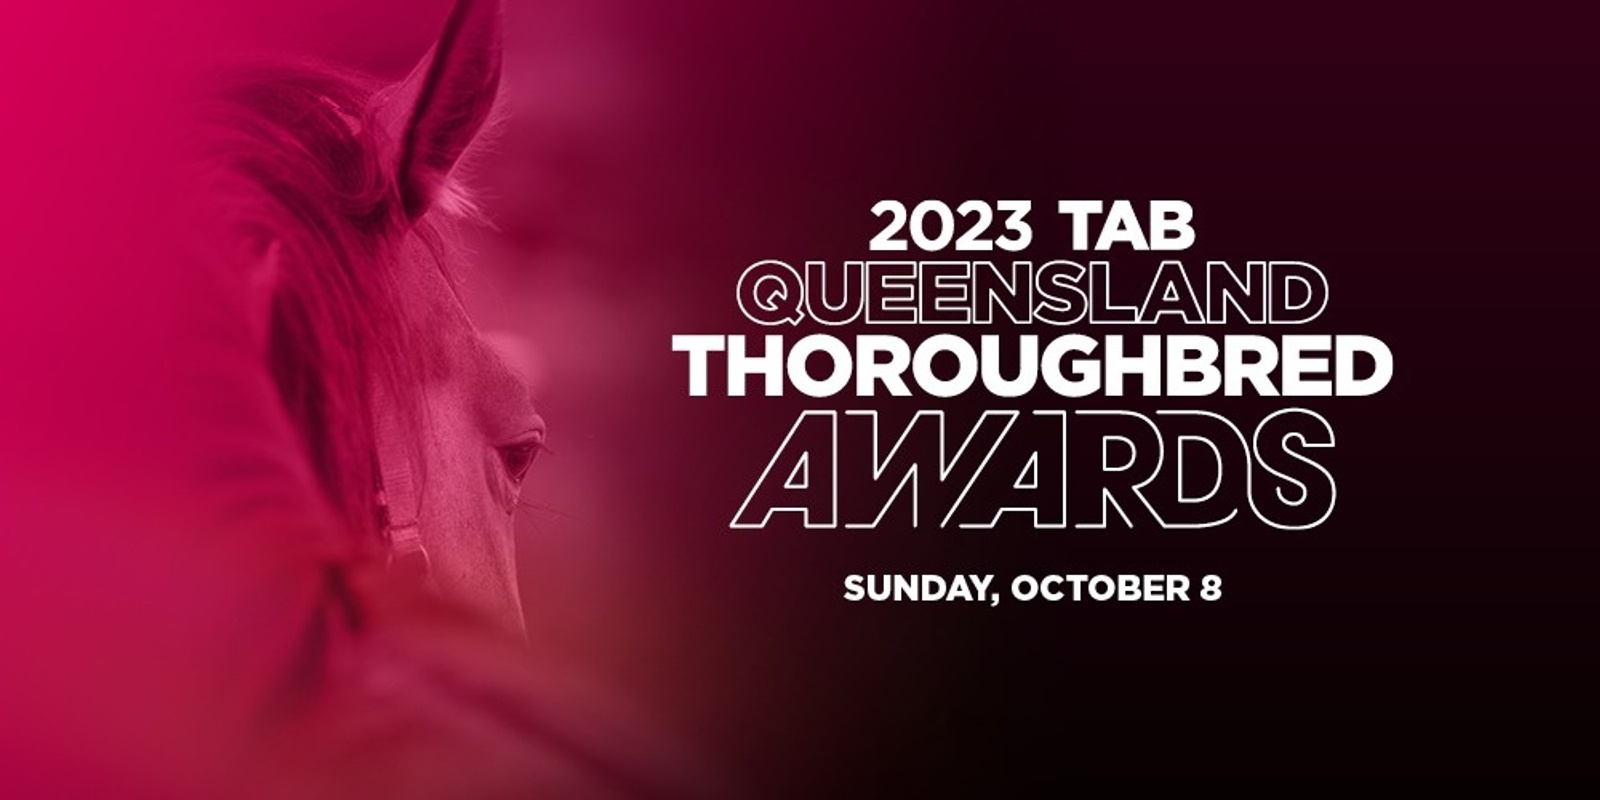 Banner image for 2023 TAB Queensland Thoroughbred Awards